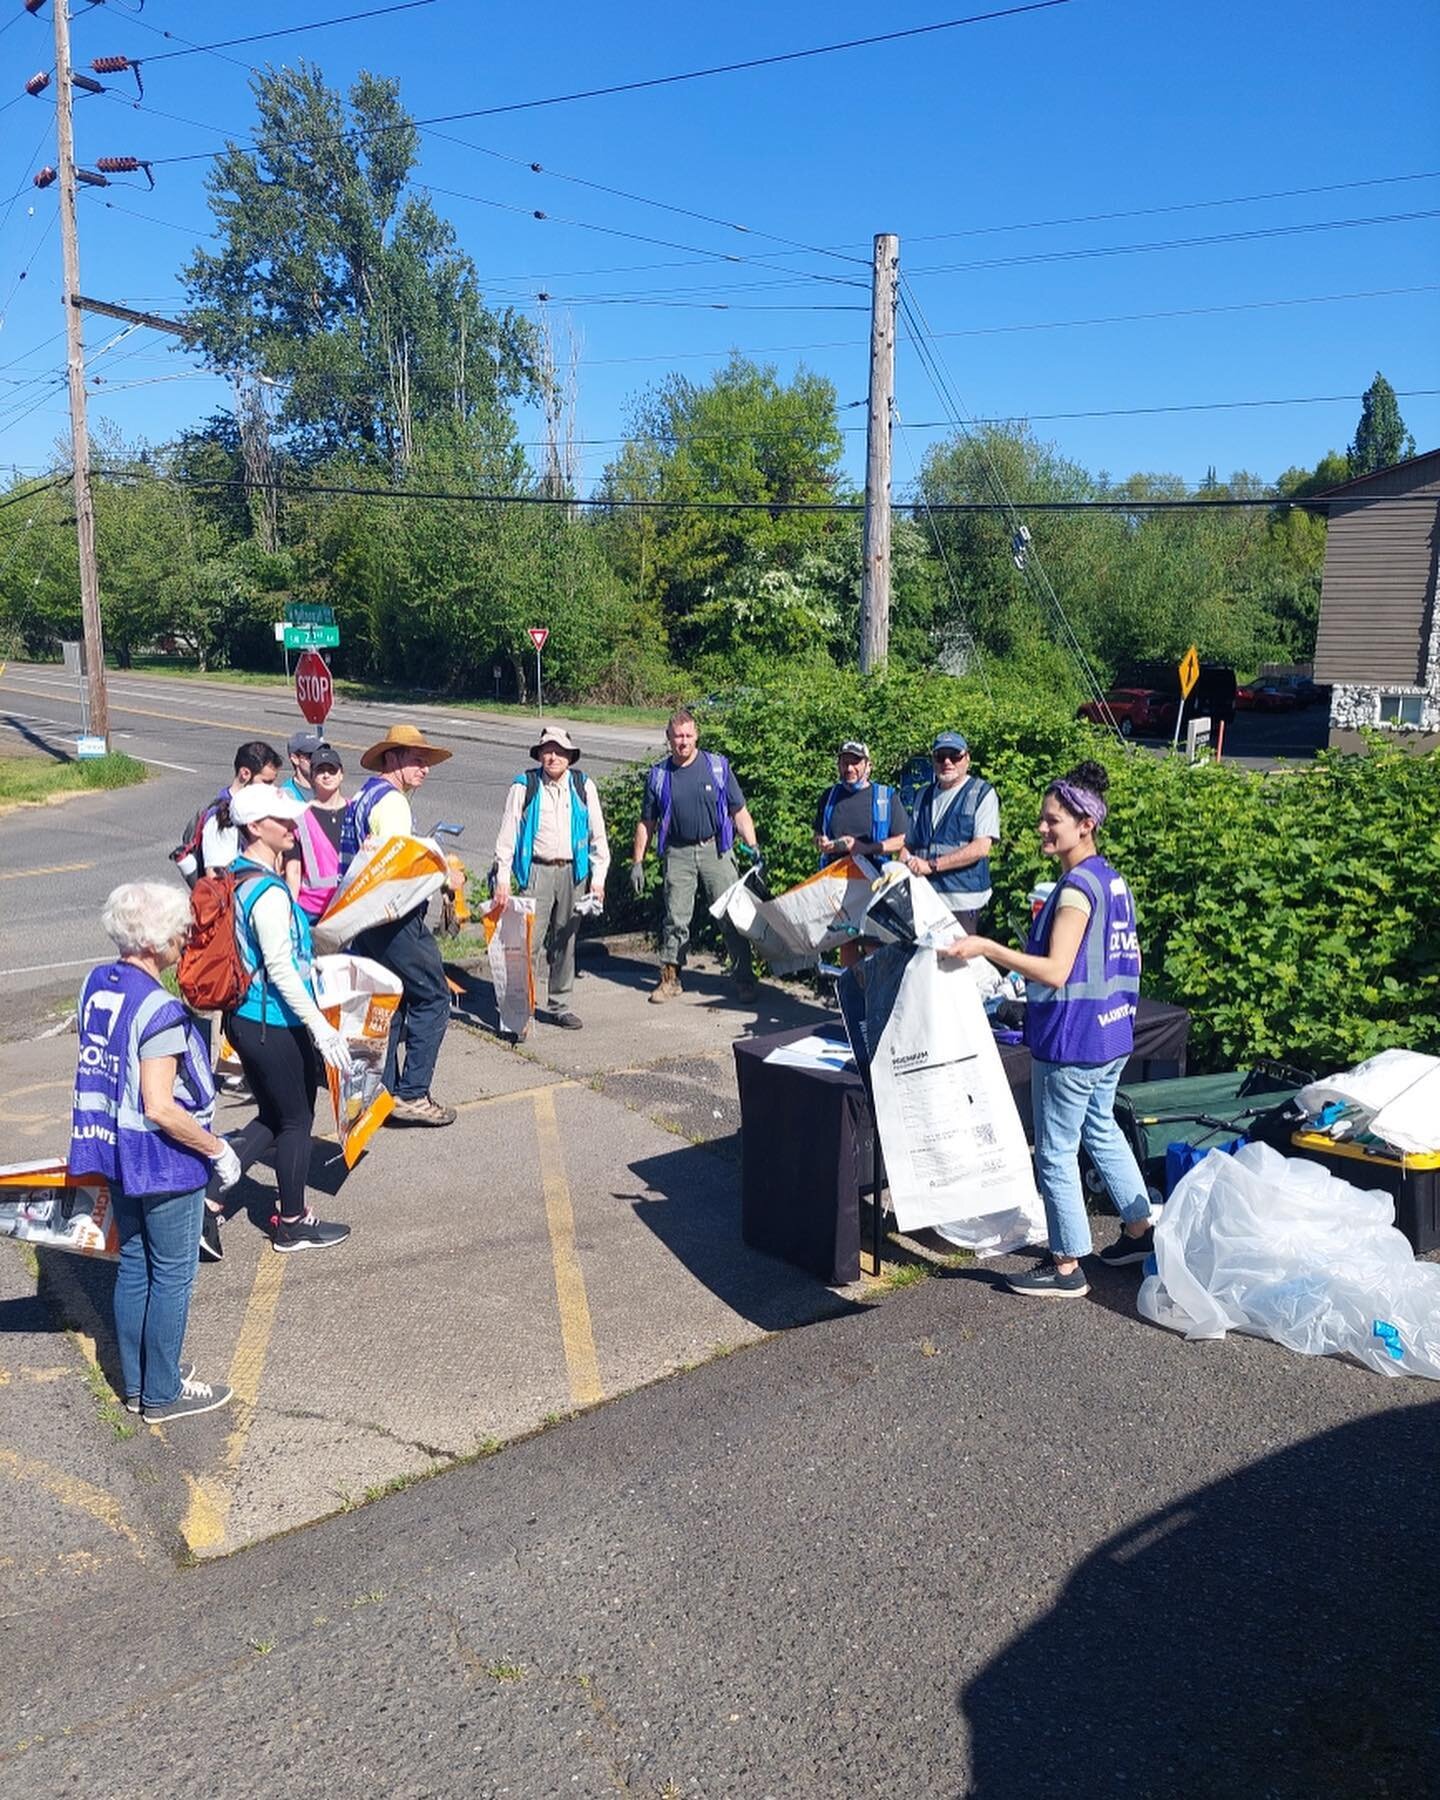 Thank you to a wonderful group of volunteers @ SOLVE who donated two hours of their time on a Saturday to cleanup Multnomah Blvd under the Barbur Blvd overpass. It was a very successful event and now the entrance to our neighborhood is clean! We&rsqu